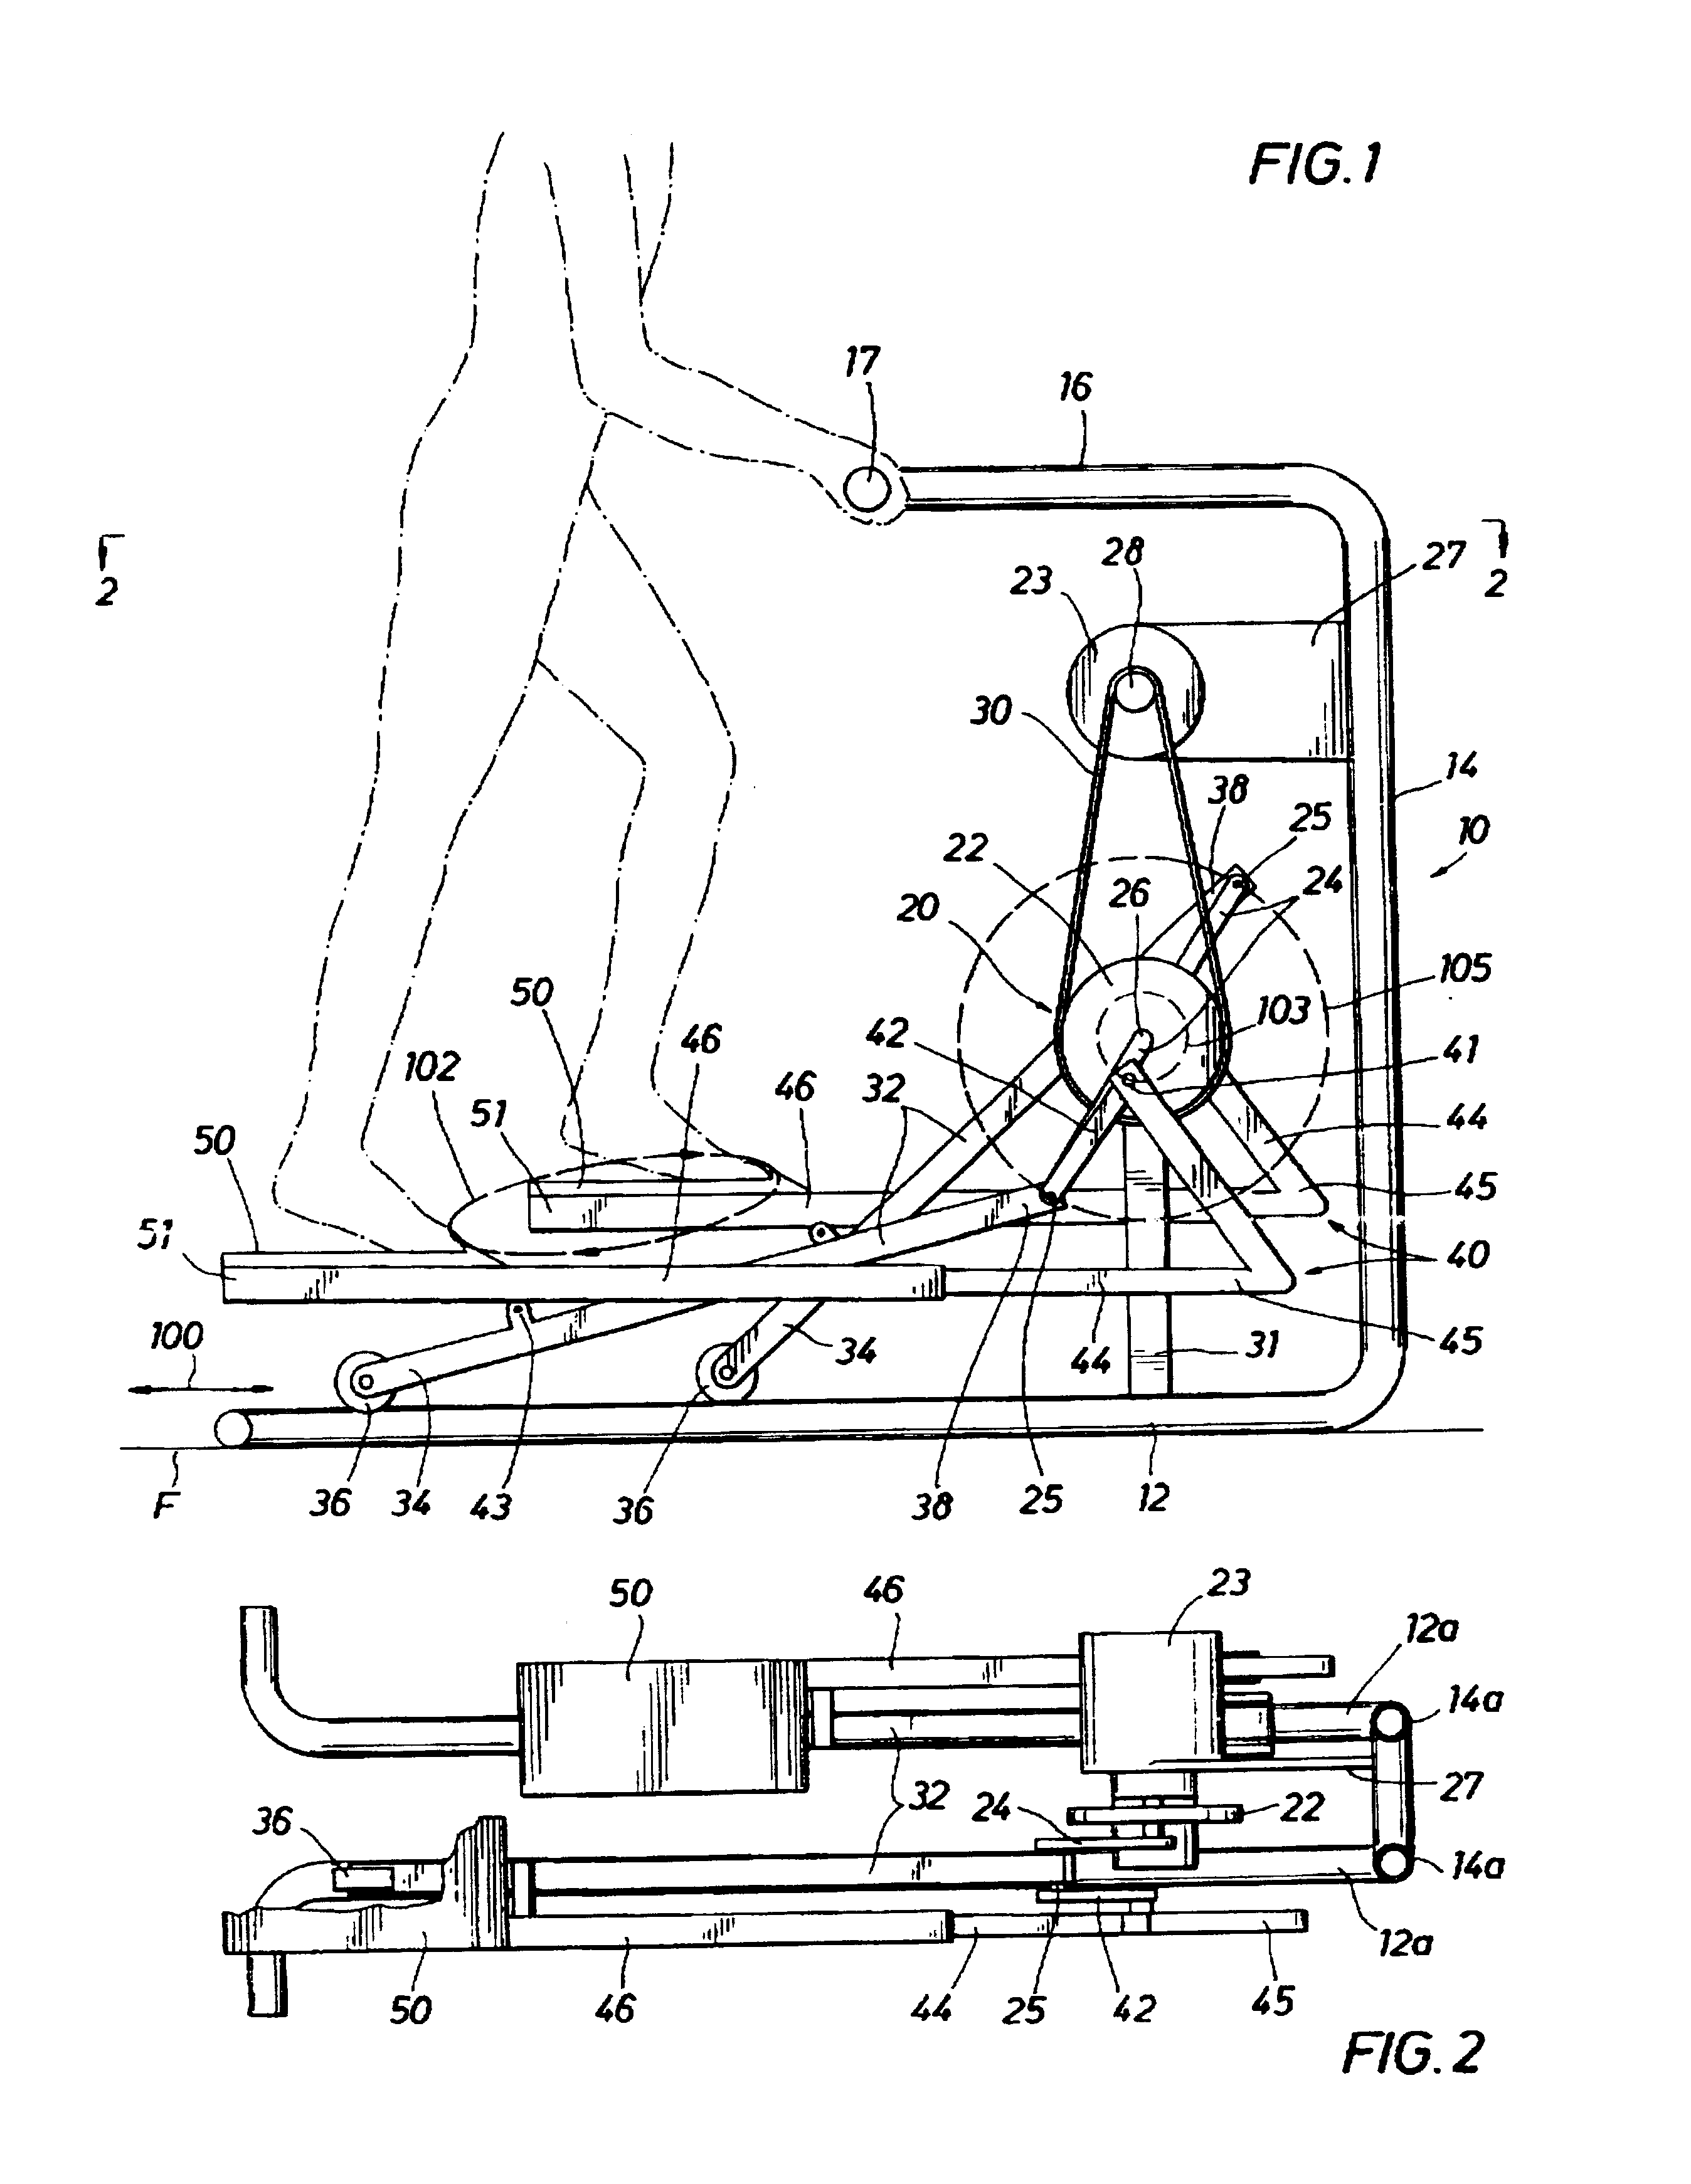 Stationary exercise apparatus having a preferred foot platform path